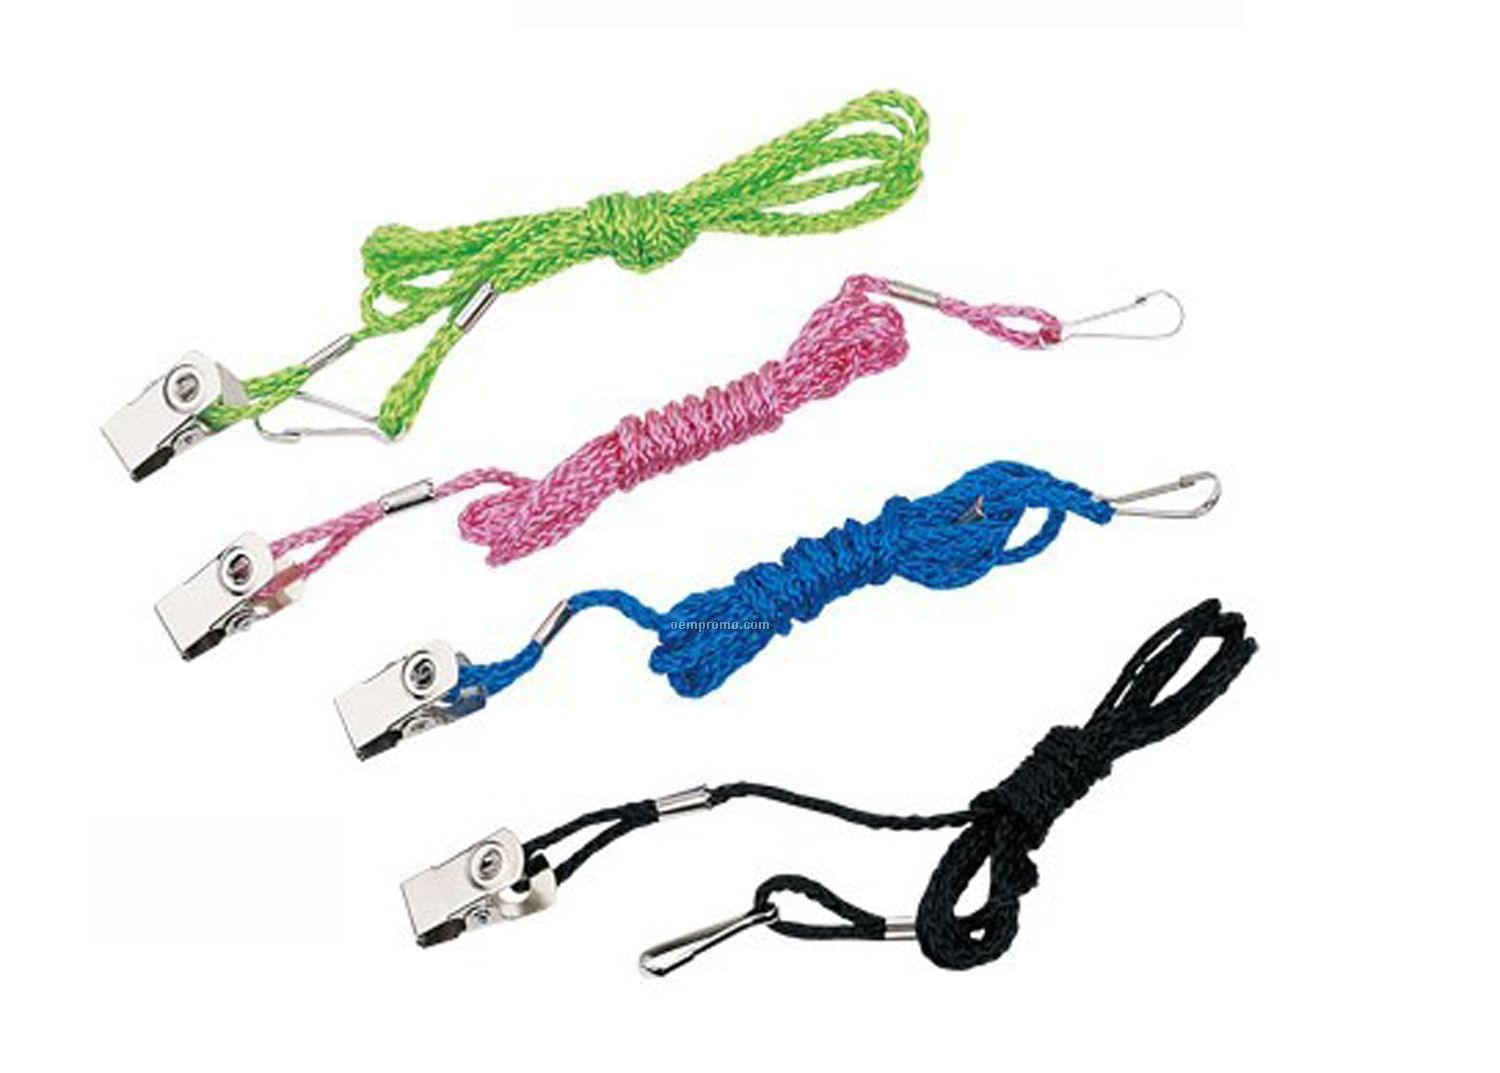 Braided Cord With Bull Dog Clip (42'')